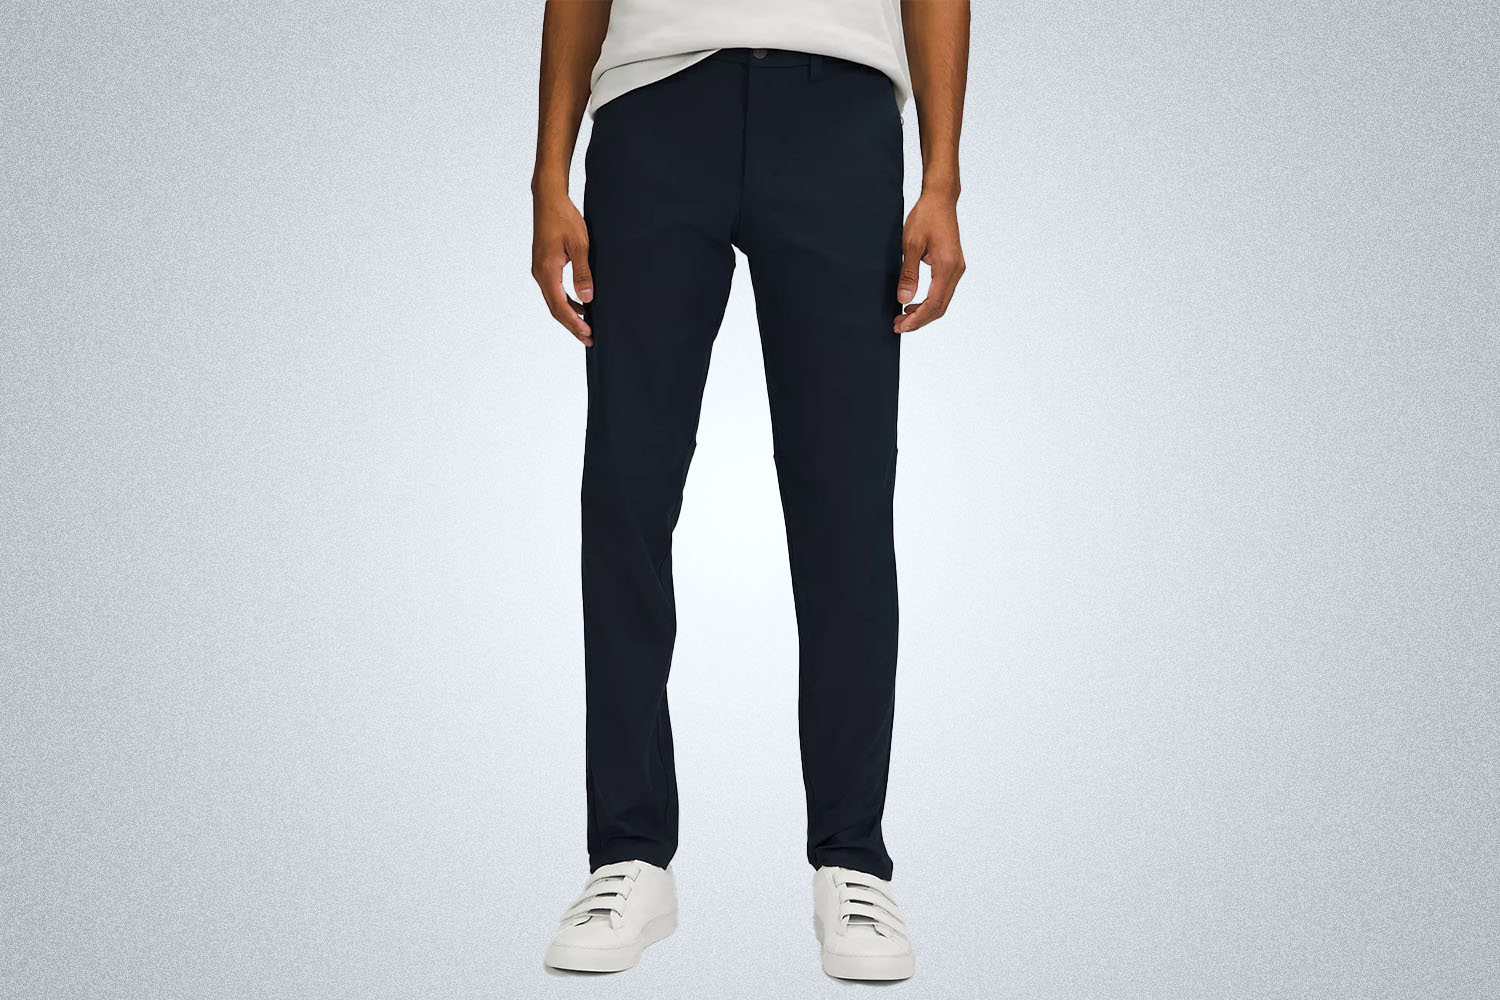 a model in a pair of navy blue pants from Lululemon on a grey background